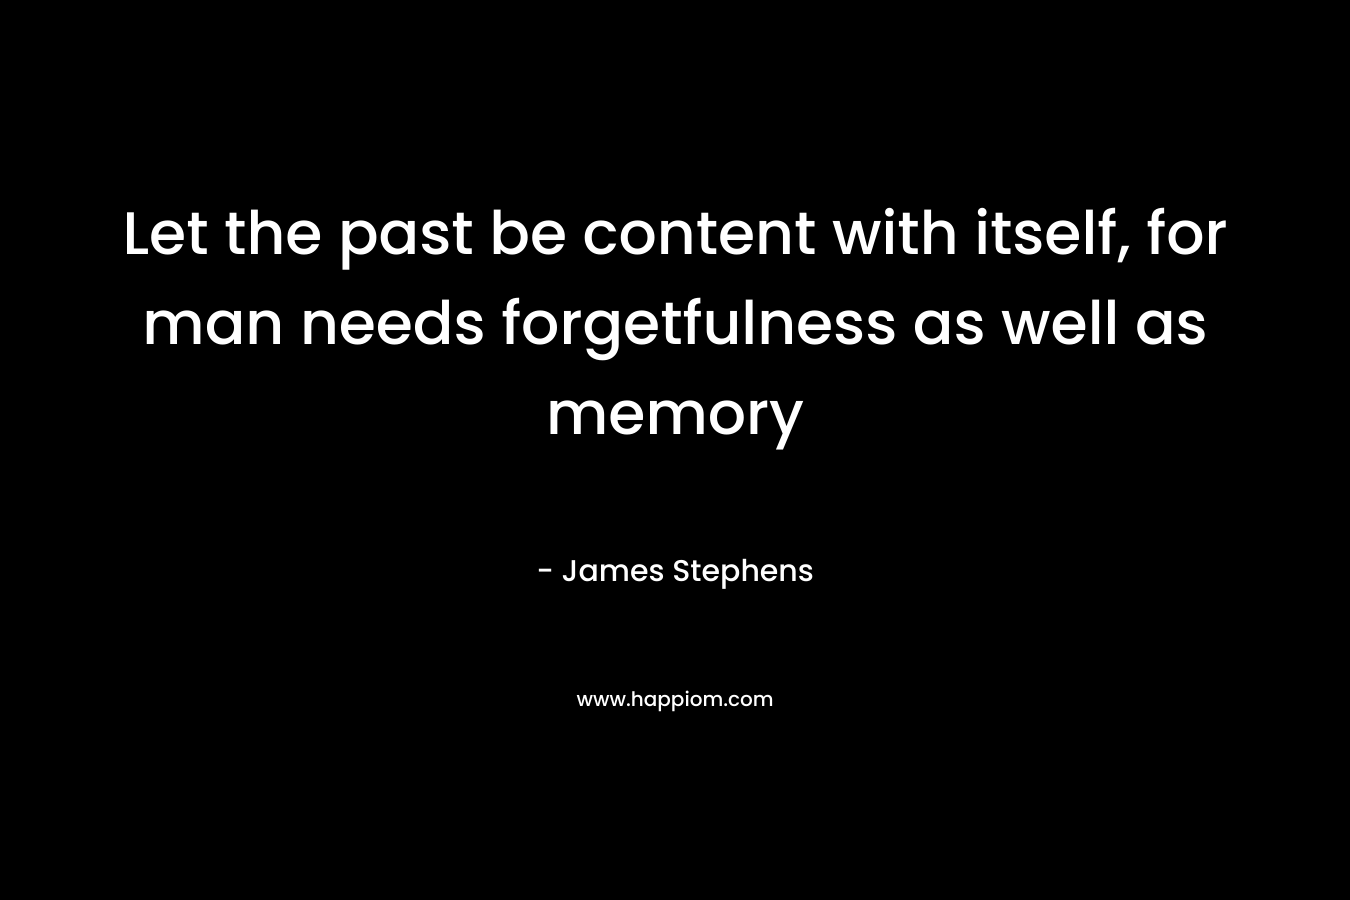 Let the past be content with itself, for man needs forgetfulness as well as memory